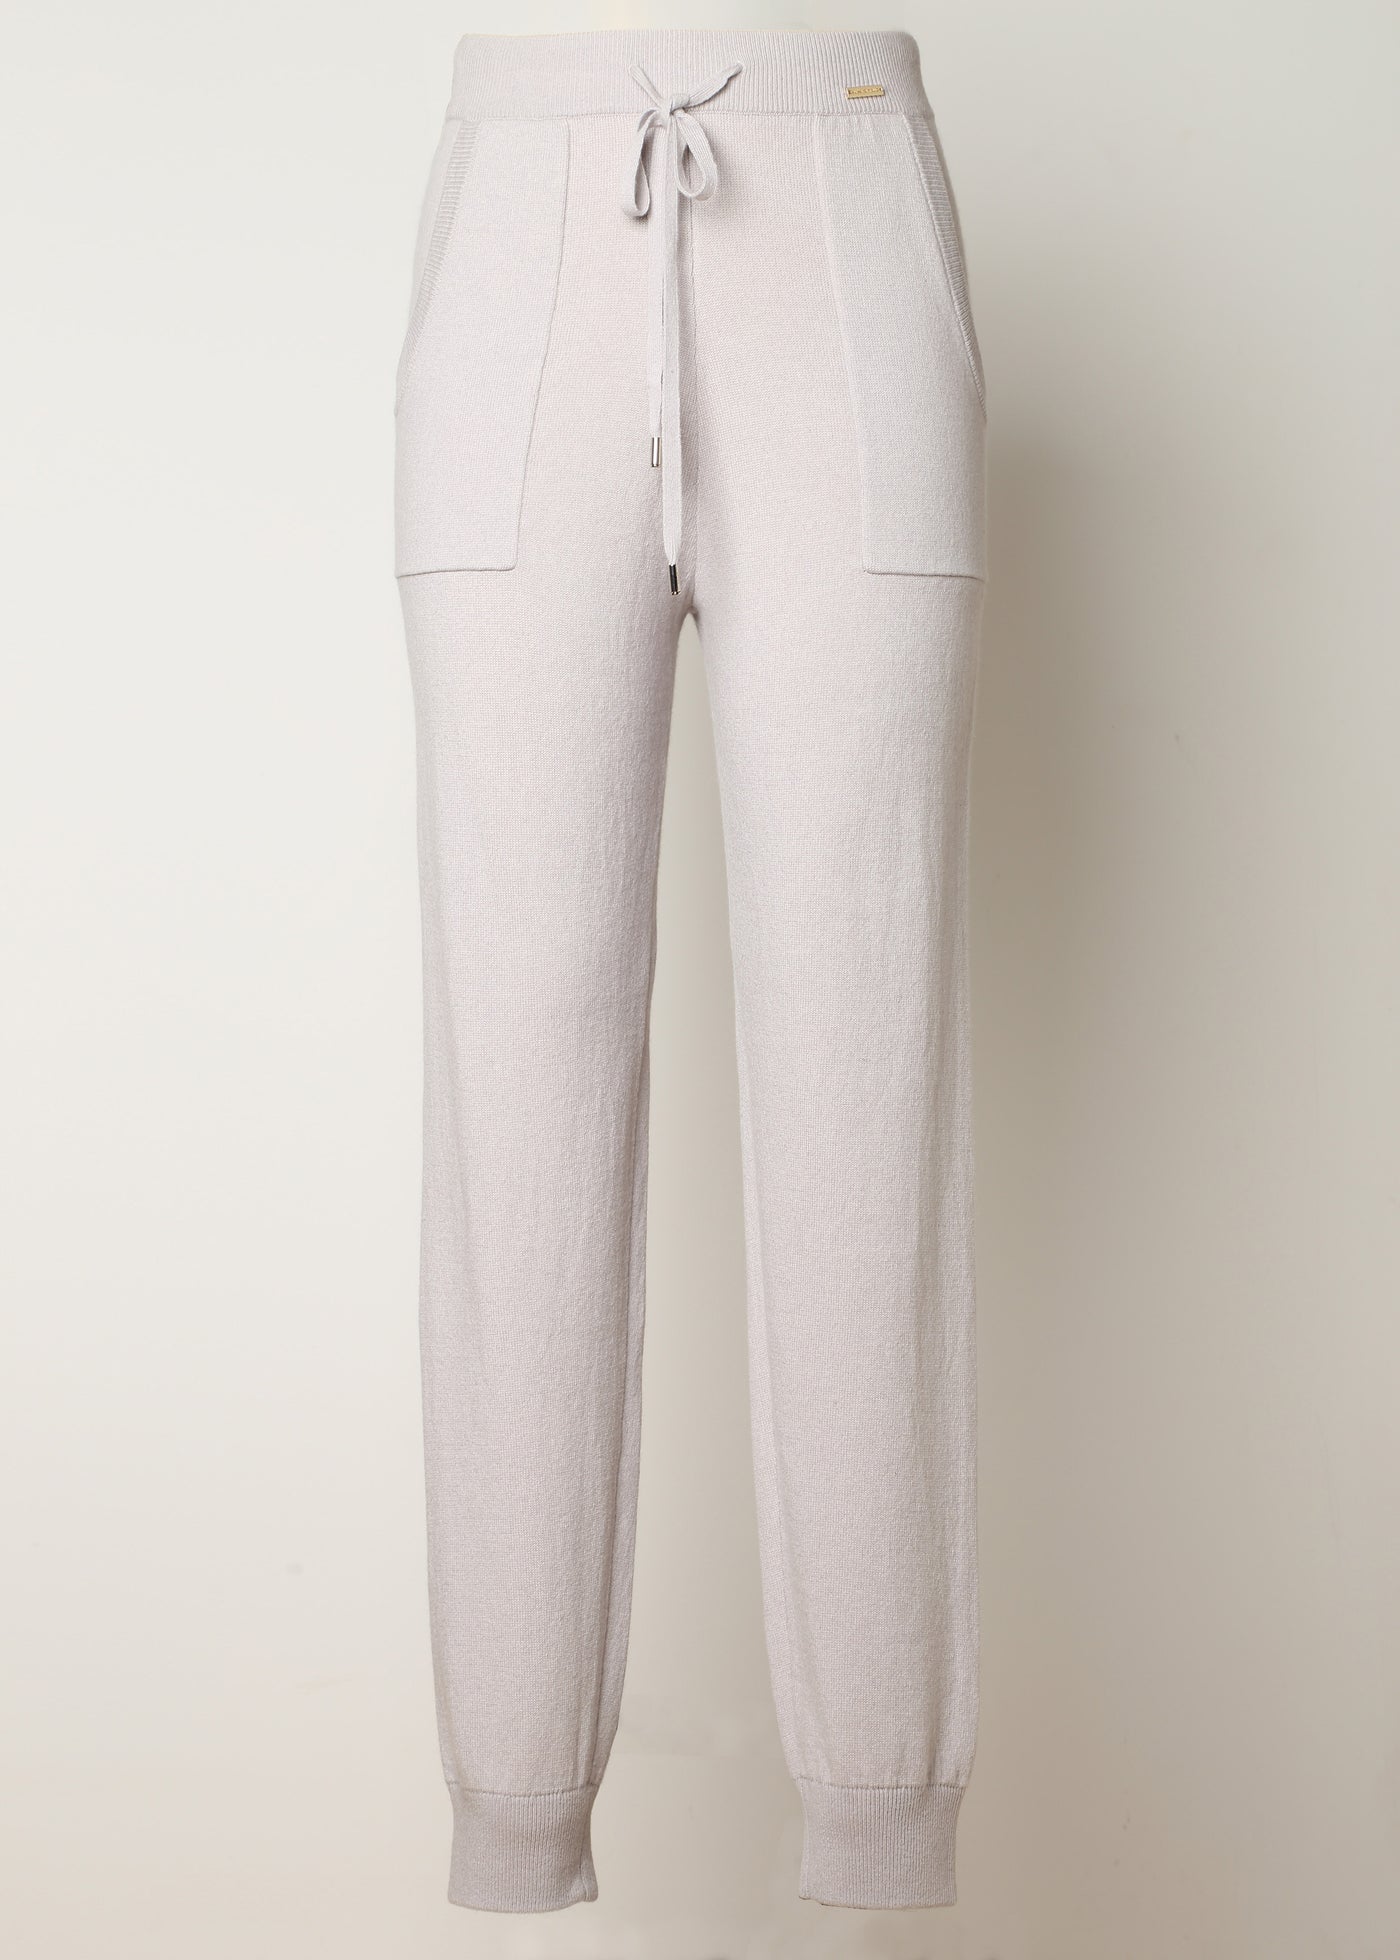 Women's Cashmere Trousers